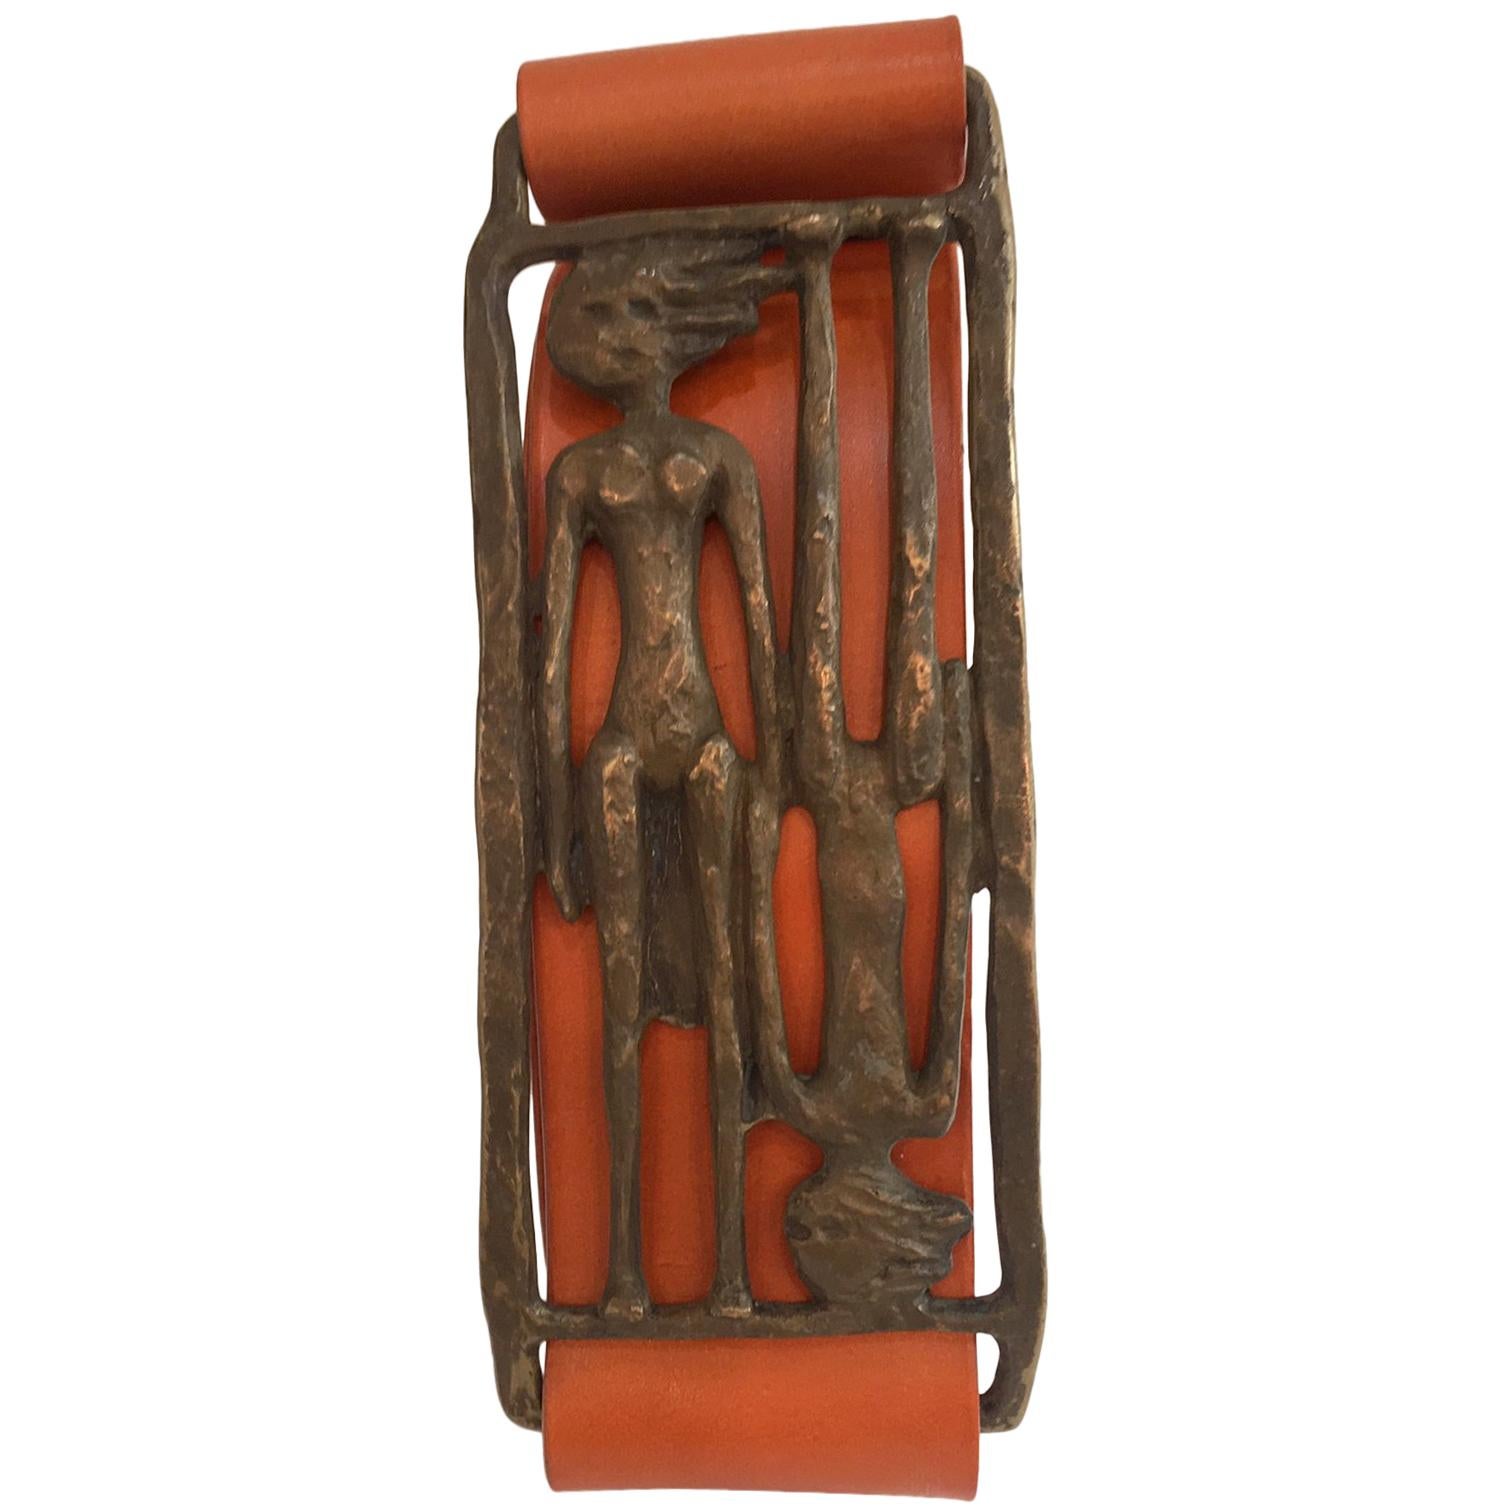 One-of-a-Kind Adam and Eve Bronze Buckle Hermes style Orange Leather Belt